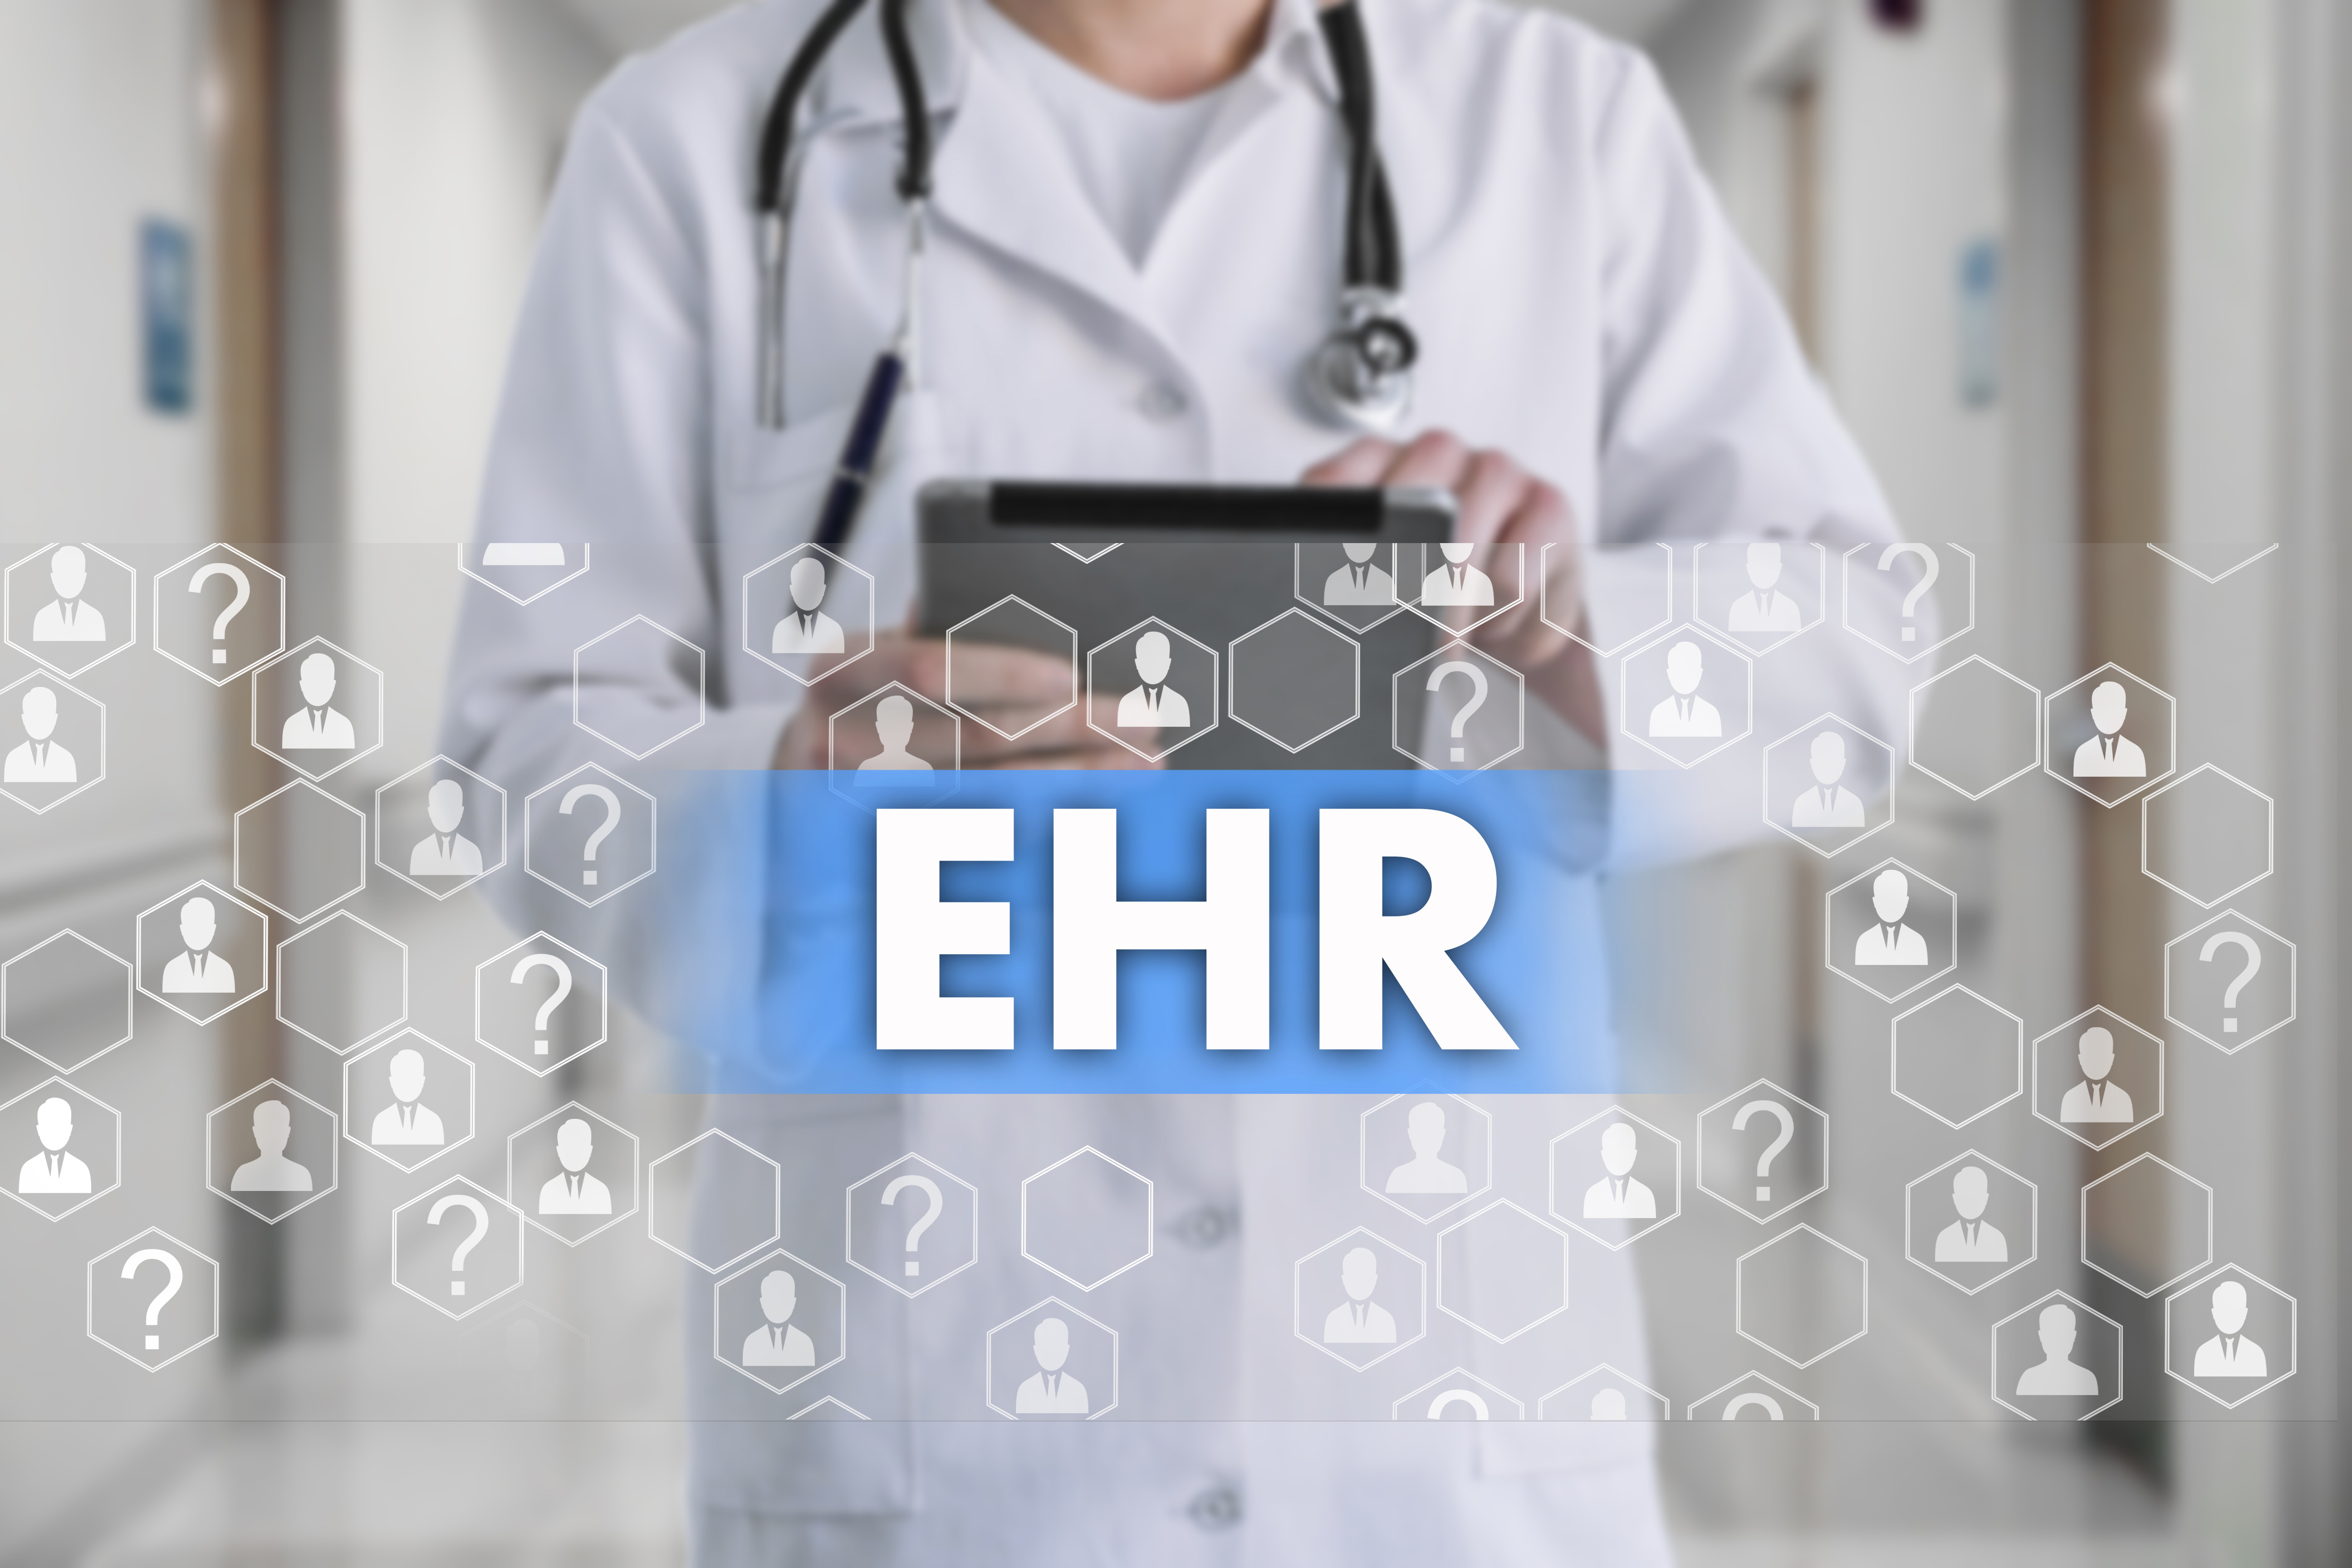 Electronic health record. EHR on the touch screen with medicine icons on the background blur Doctor in hospital.Innovation treatment, service, data analysis health.